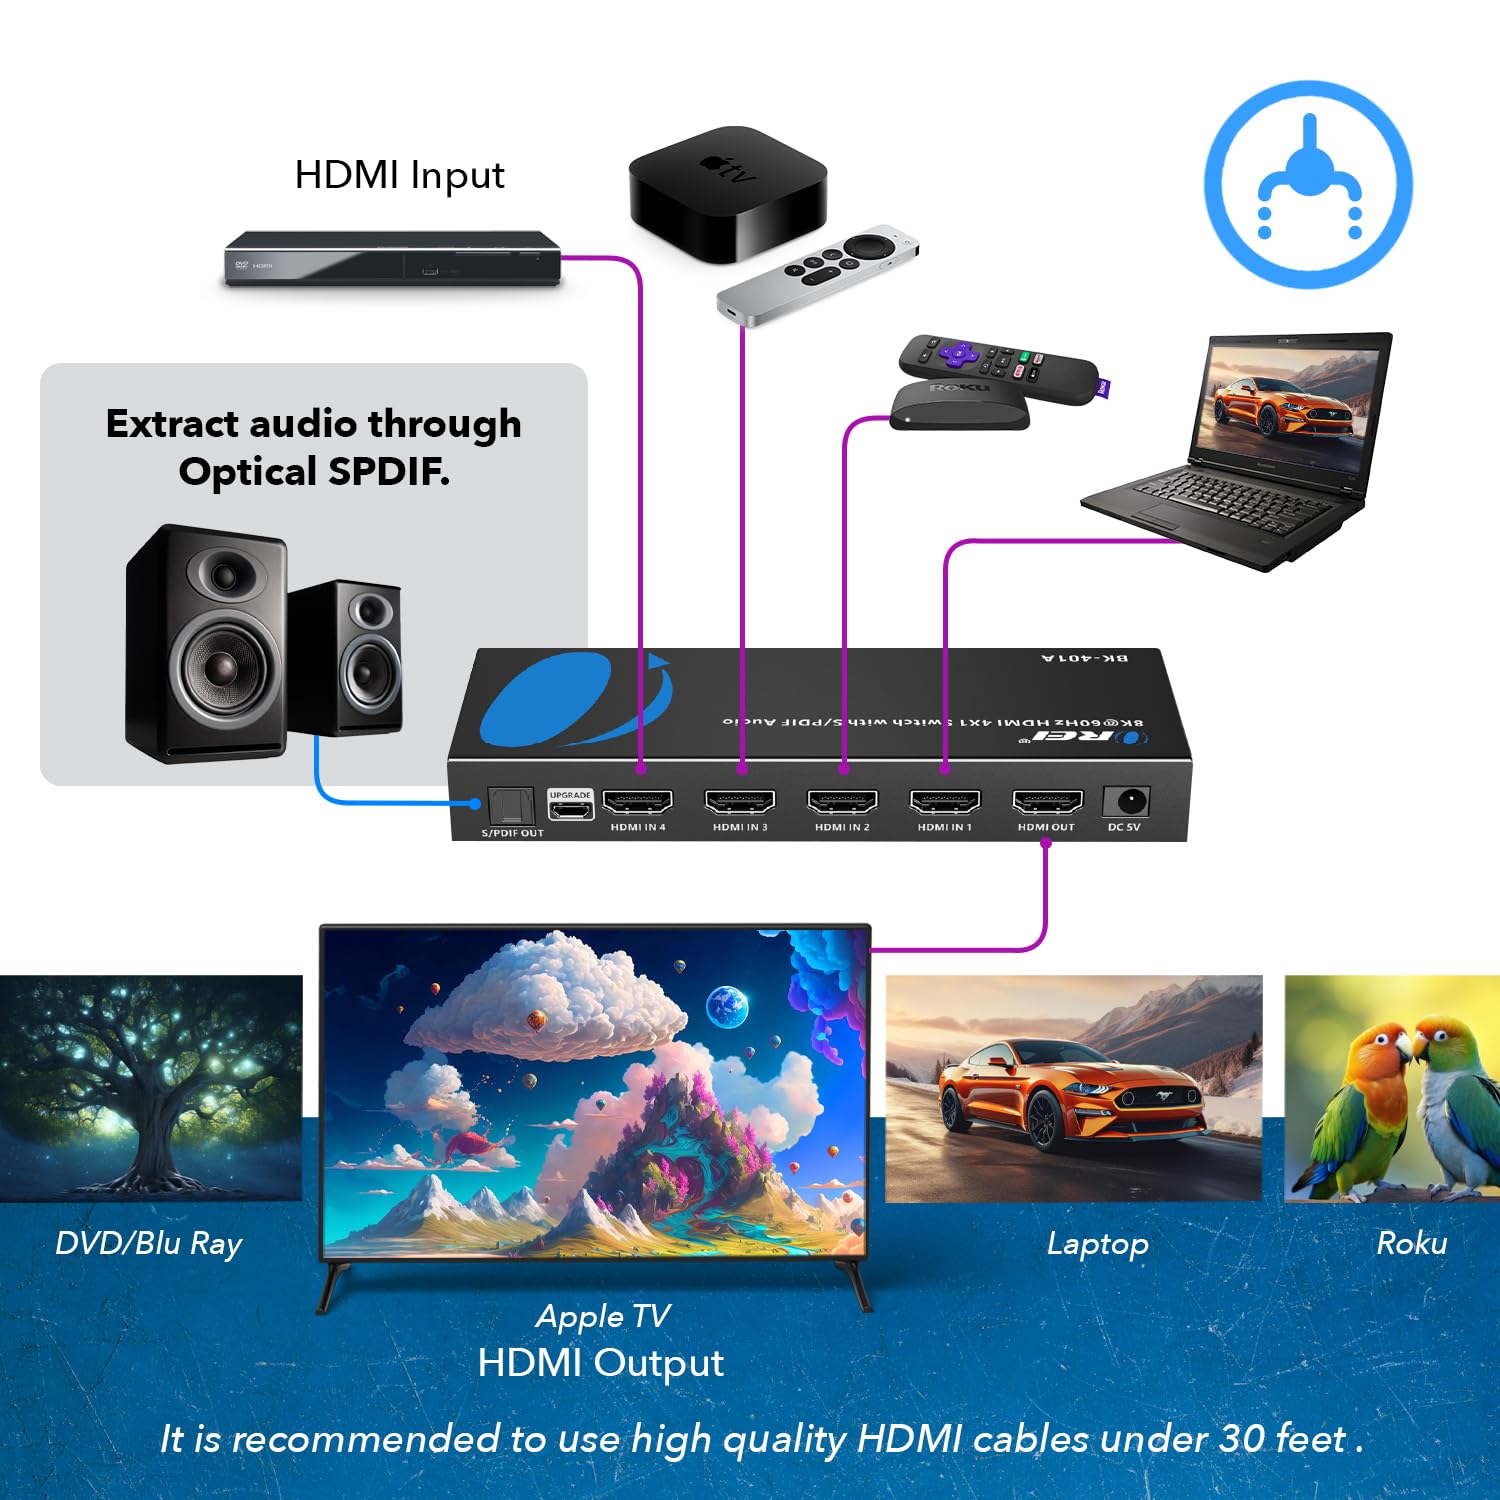 OREI 8K HDMI 2.1 Switch 4x1, Switcher with Audio Extractor UltraHD Supports Upto 4K @ 120Hz PS5, Xbox, Gaming, Remote Contorl IR EDID HDCP 2.3 - Optical Out (BK-401A)